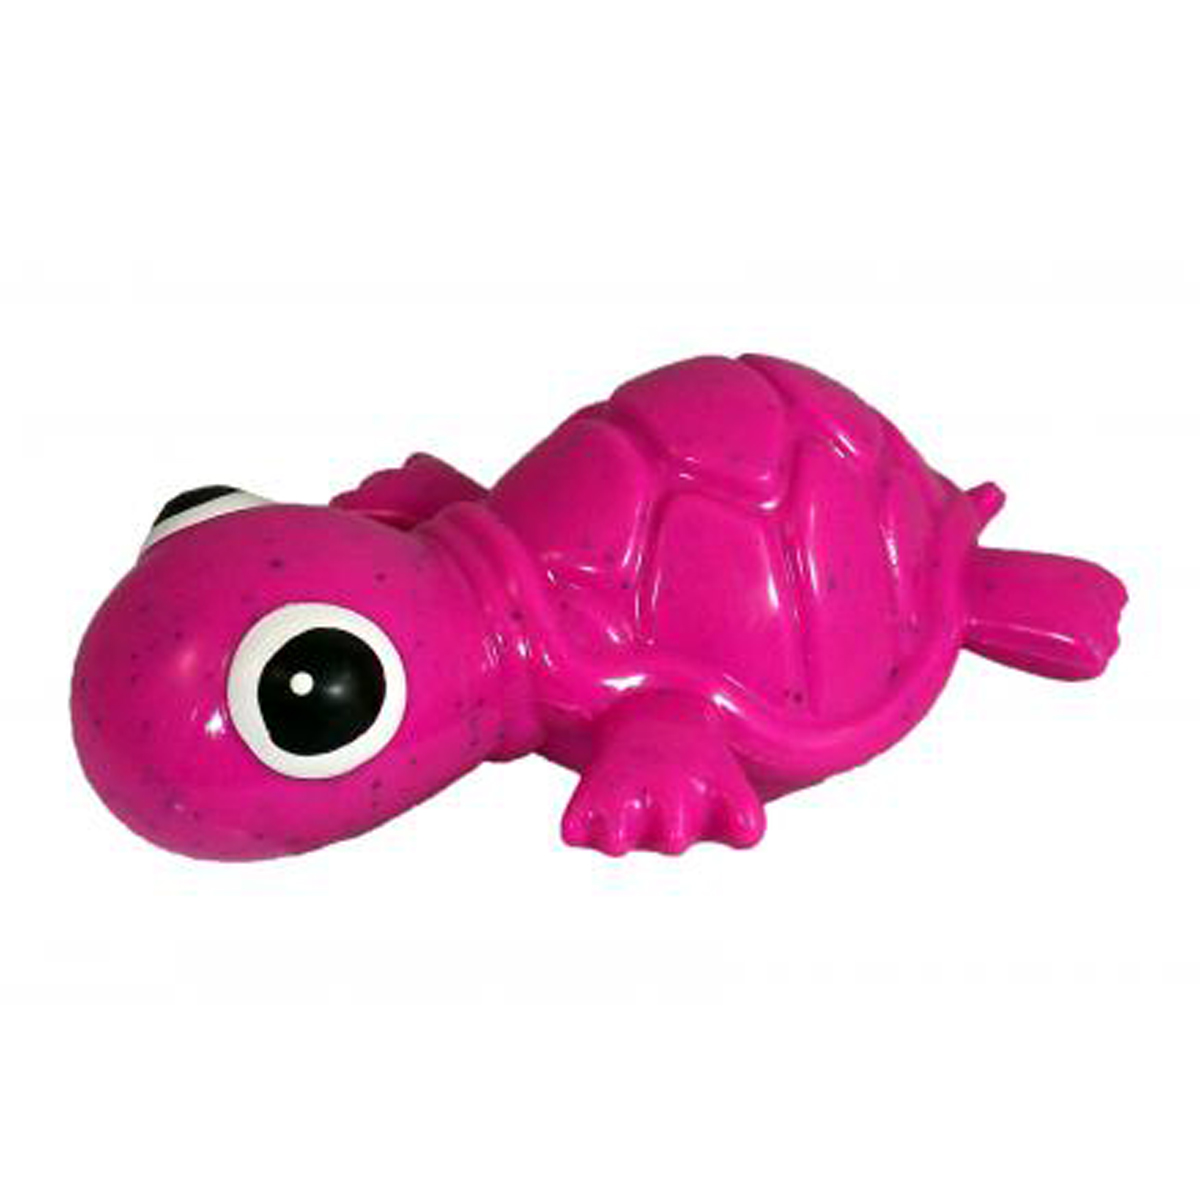 Cycle Dog 3-Play Turtle Dog Toy - Pink